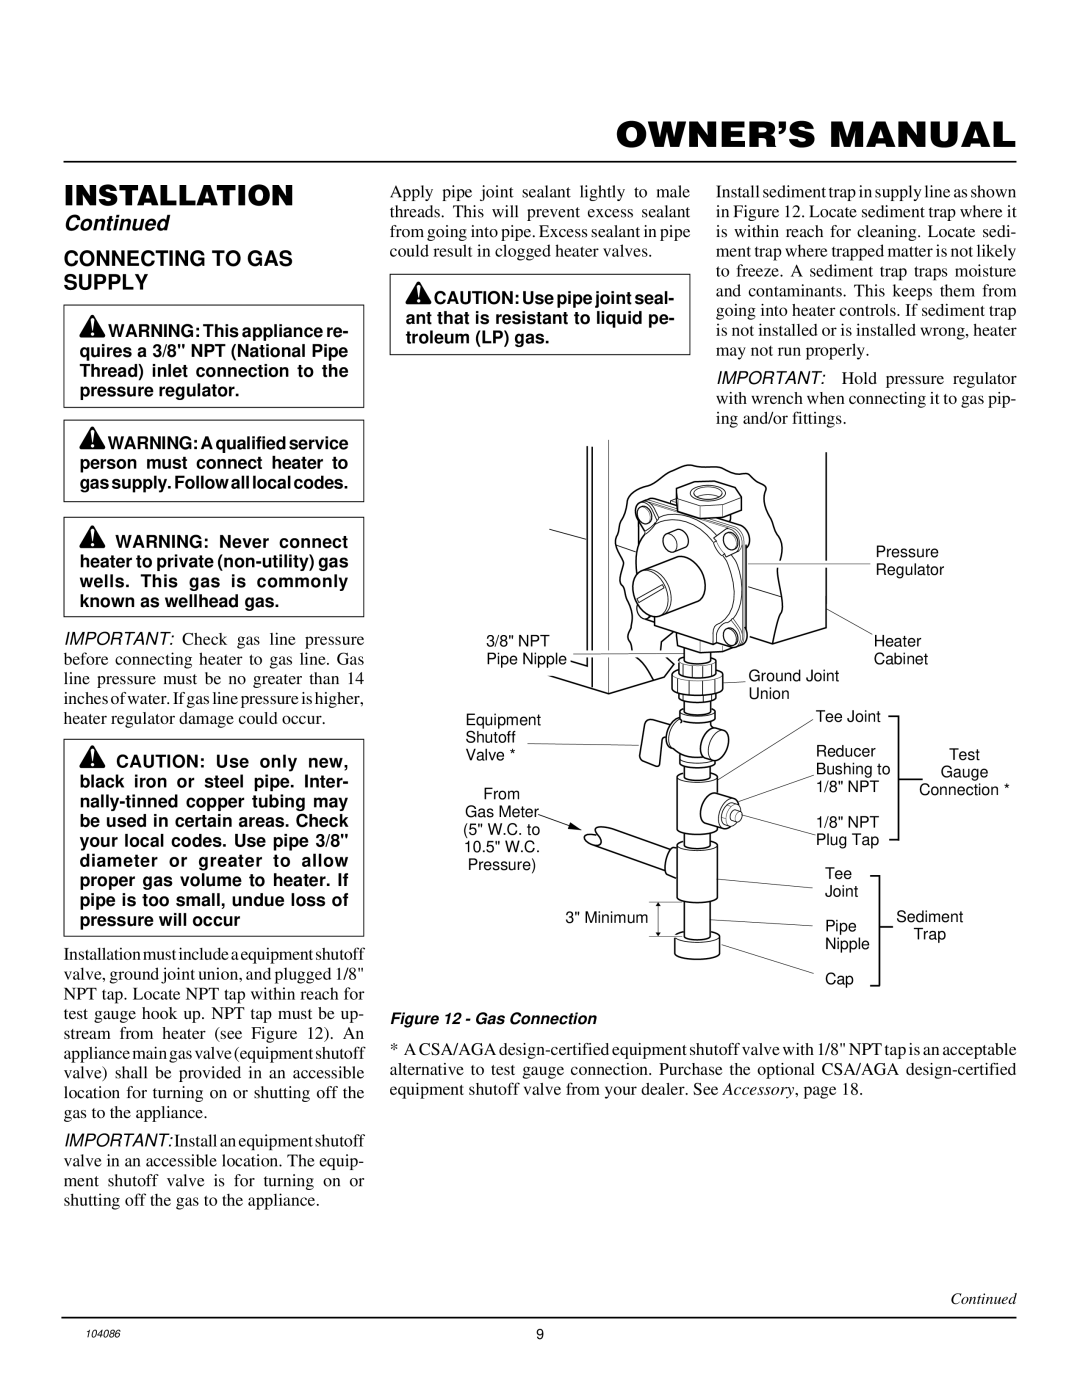 Desa VN10TA installation manual Connecting to GAS Supply, Gas Connection 